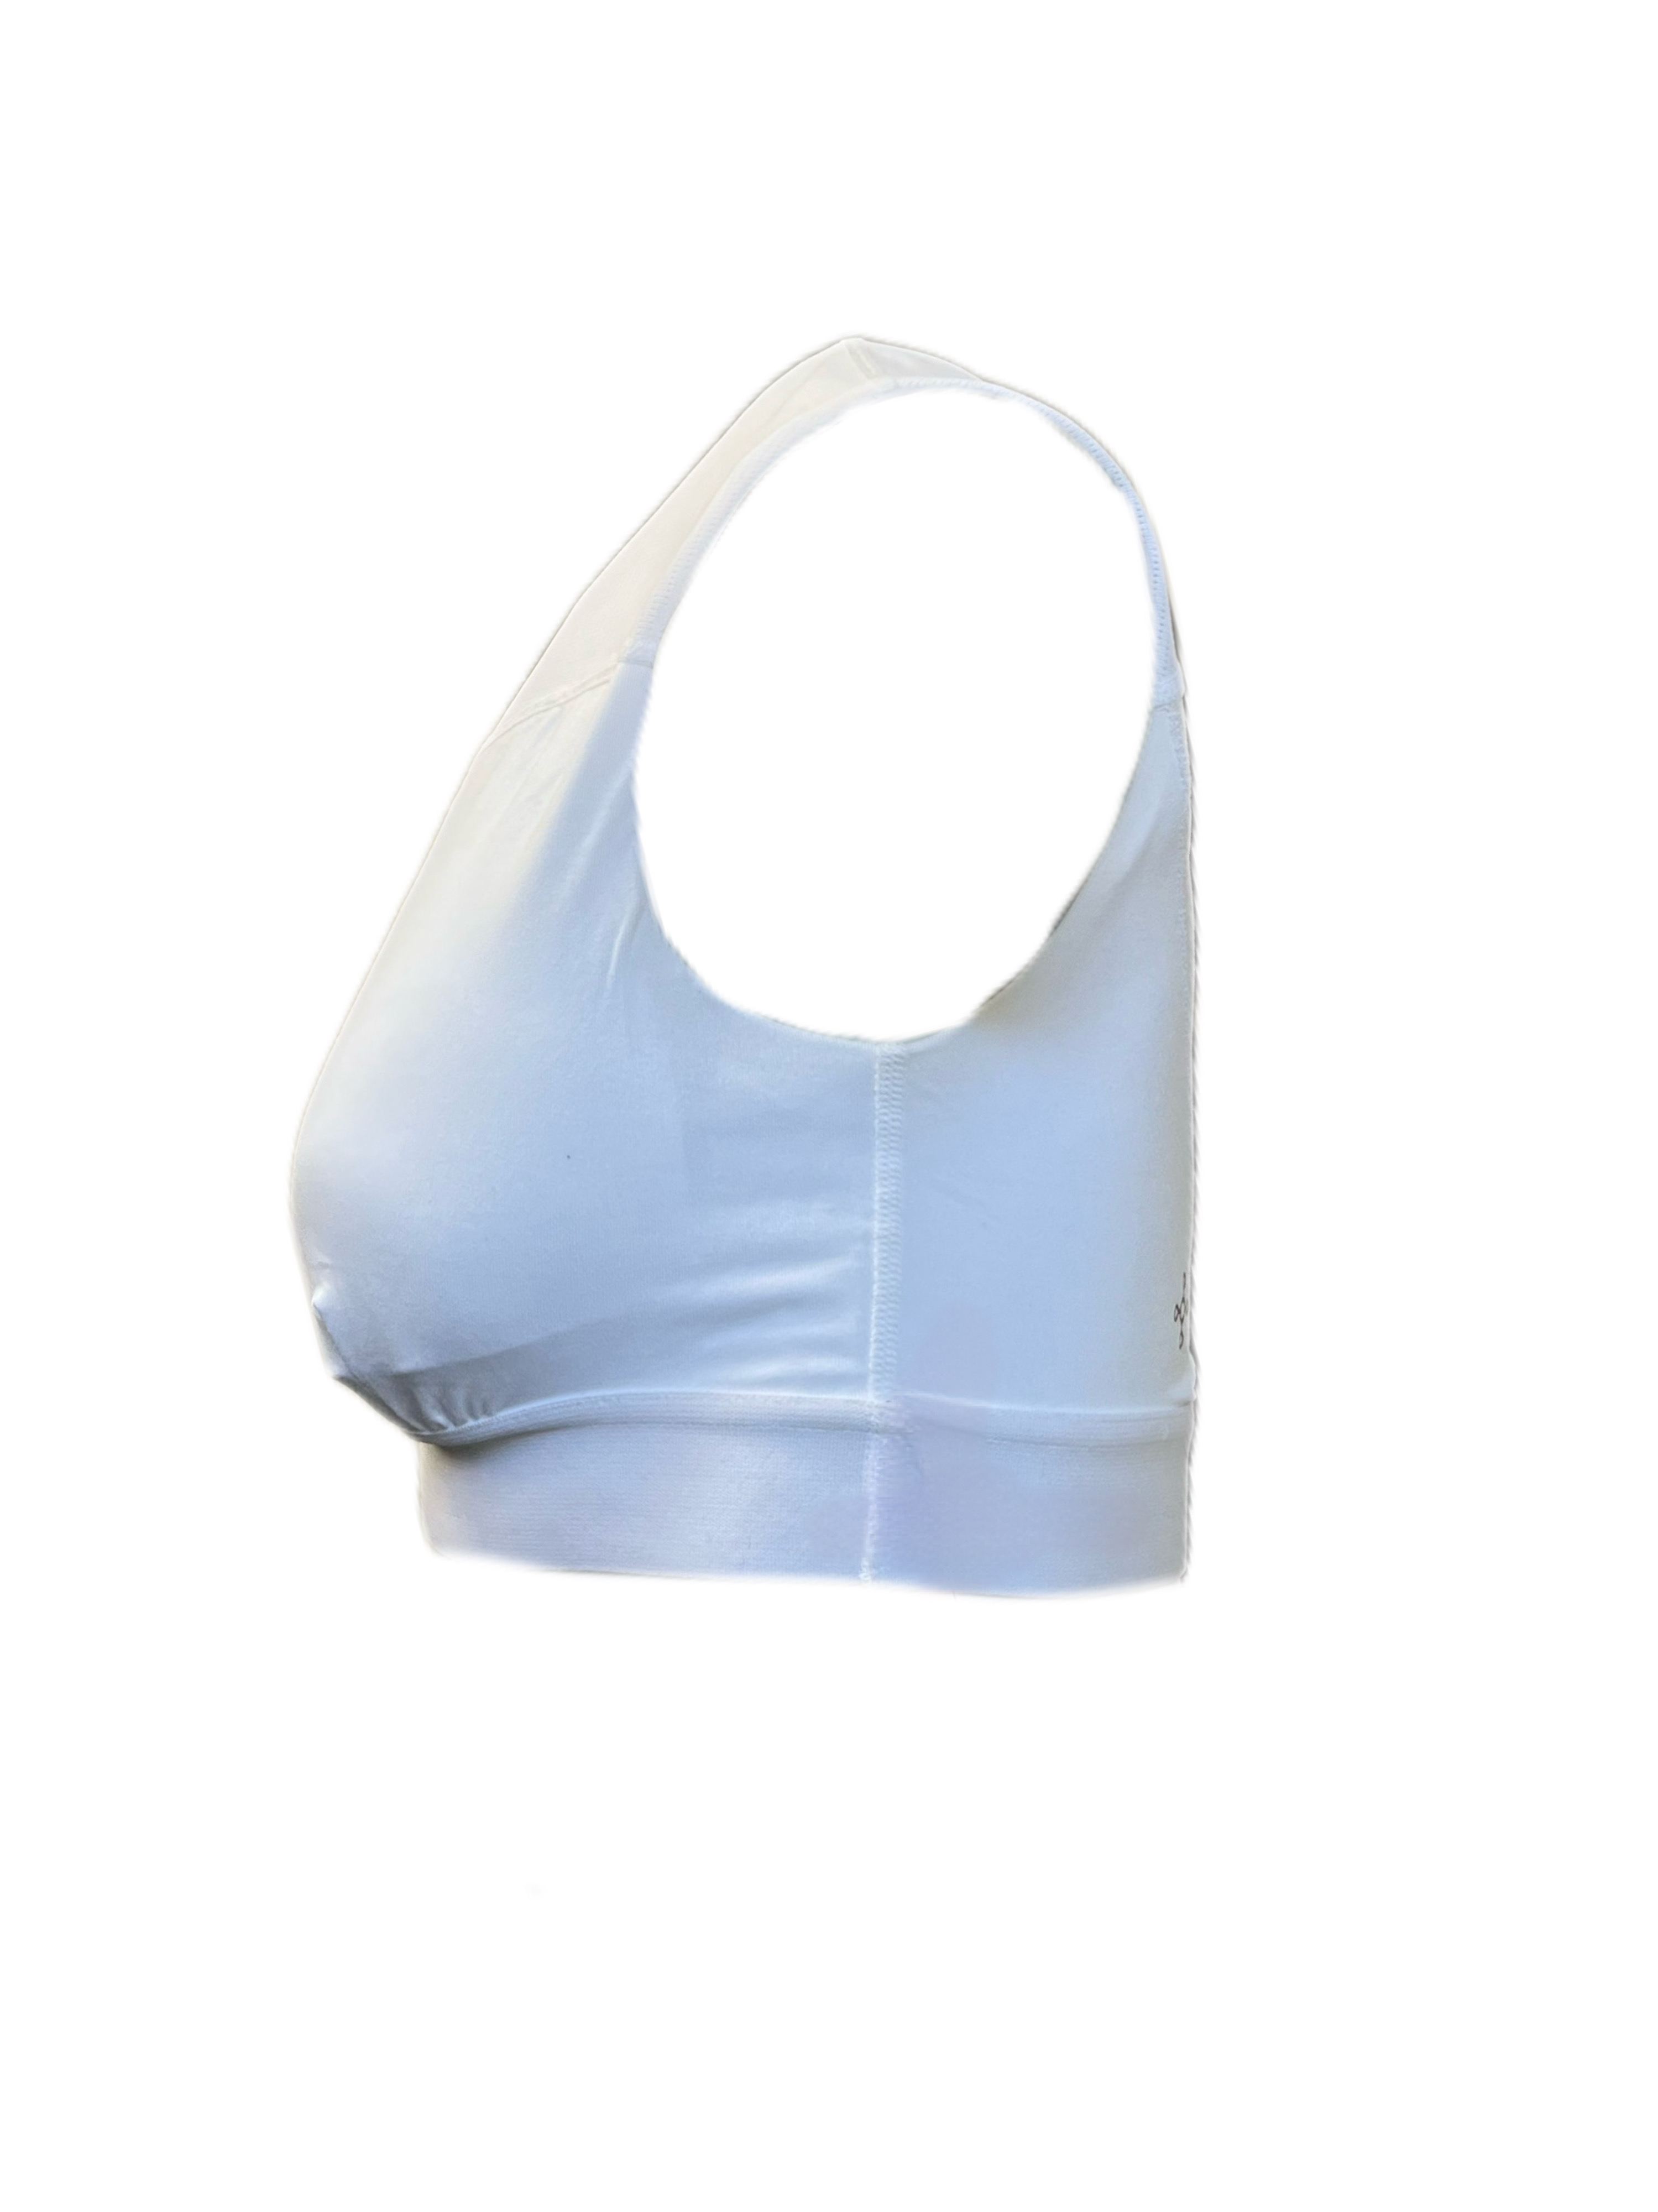 TOMMIE COPPER Womens White Shoulder Support Comfort Bra, X